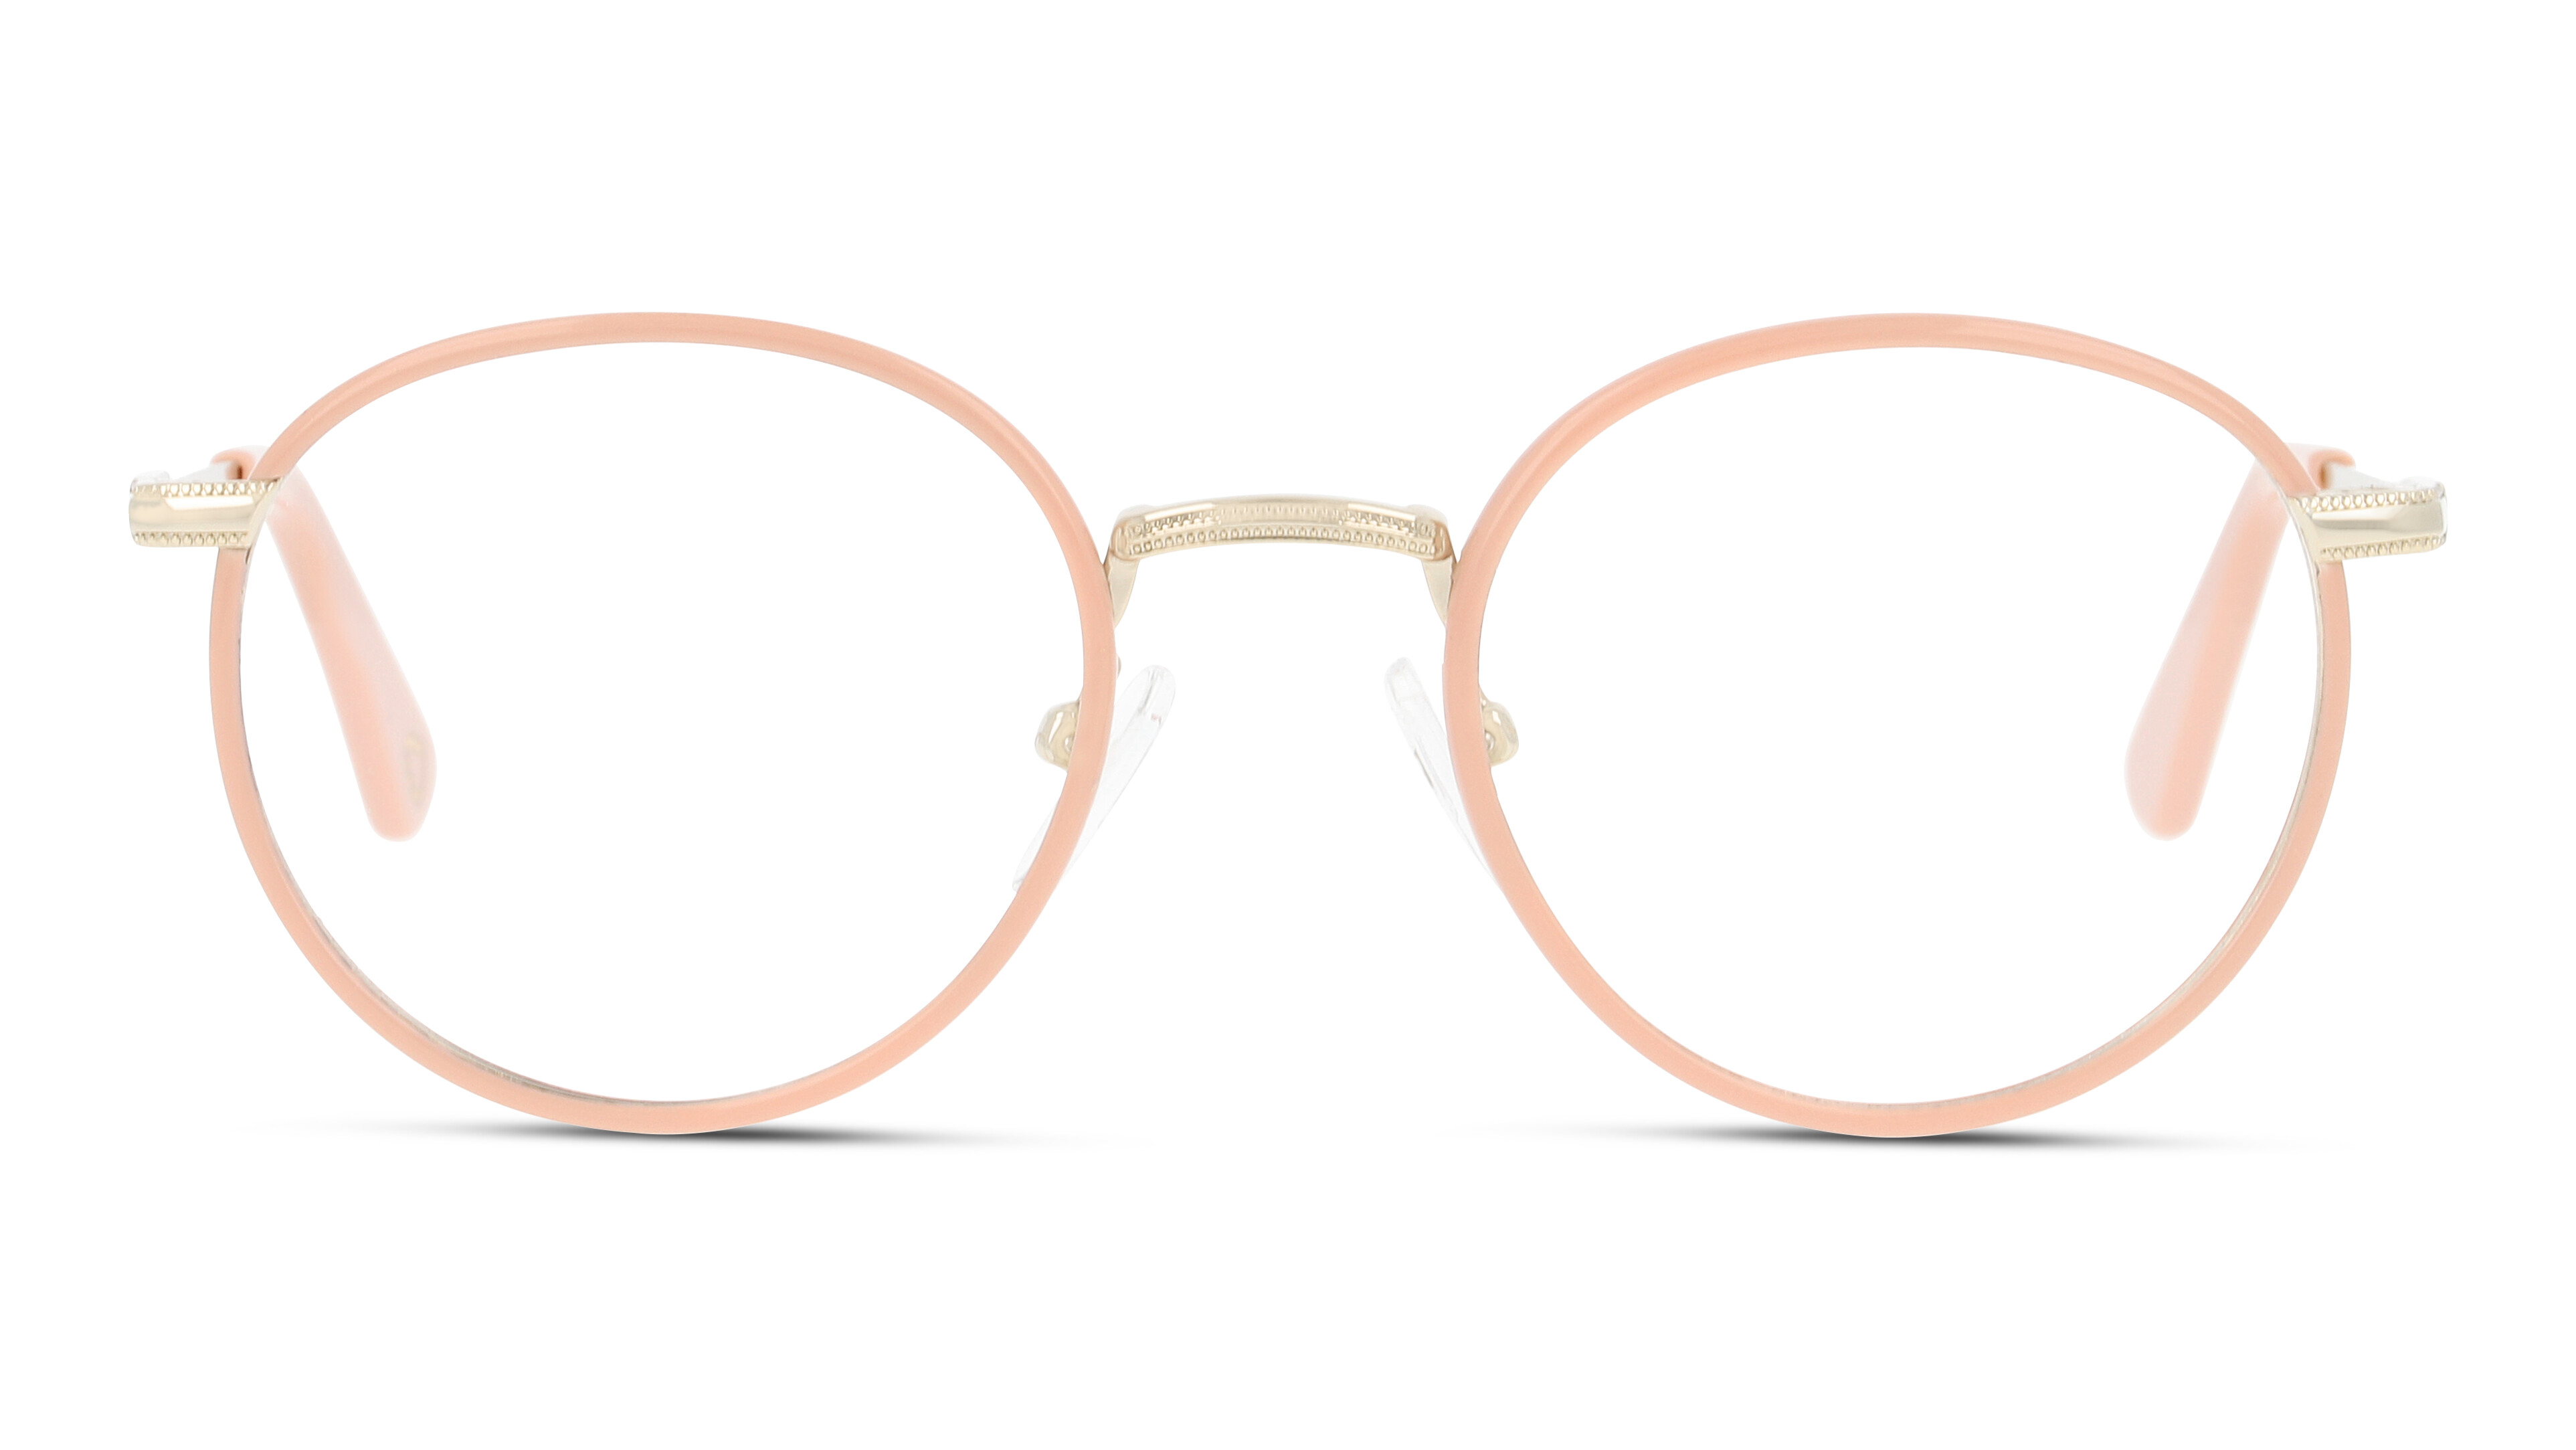 Front UNOFFICIAL UNOT0104 PD00 Brille Rosa, Goldfarben